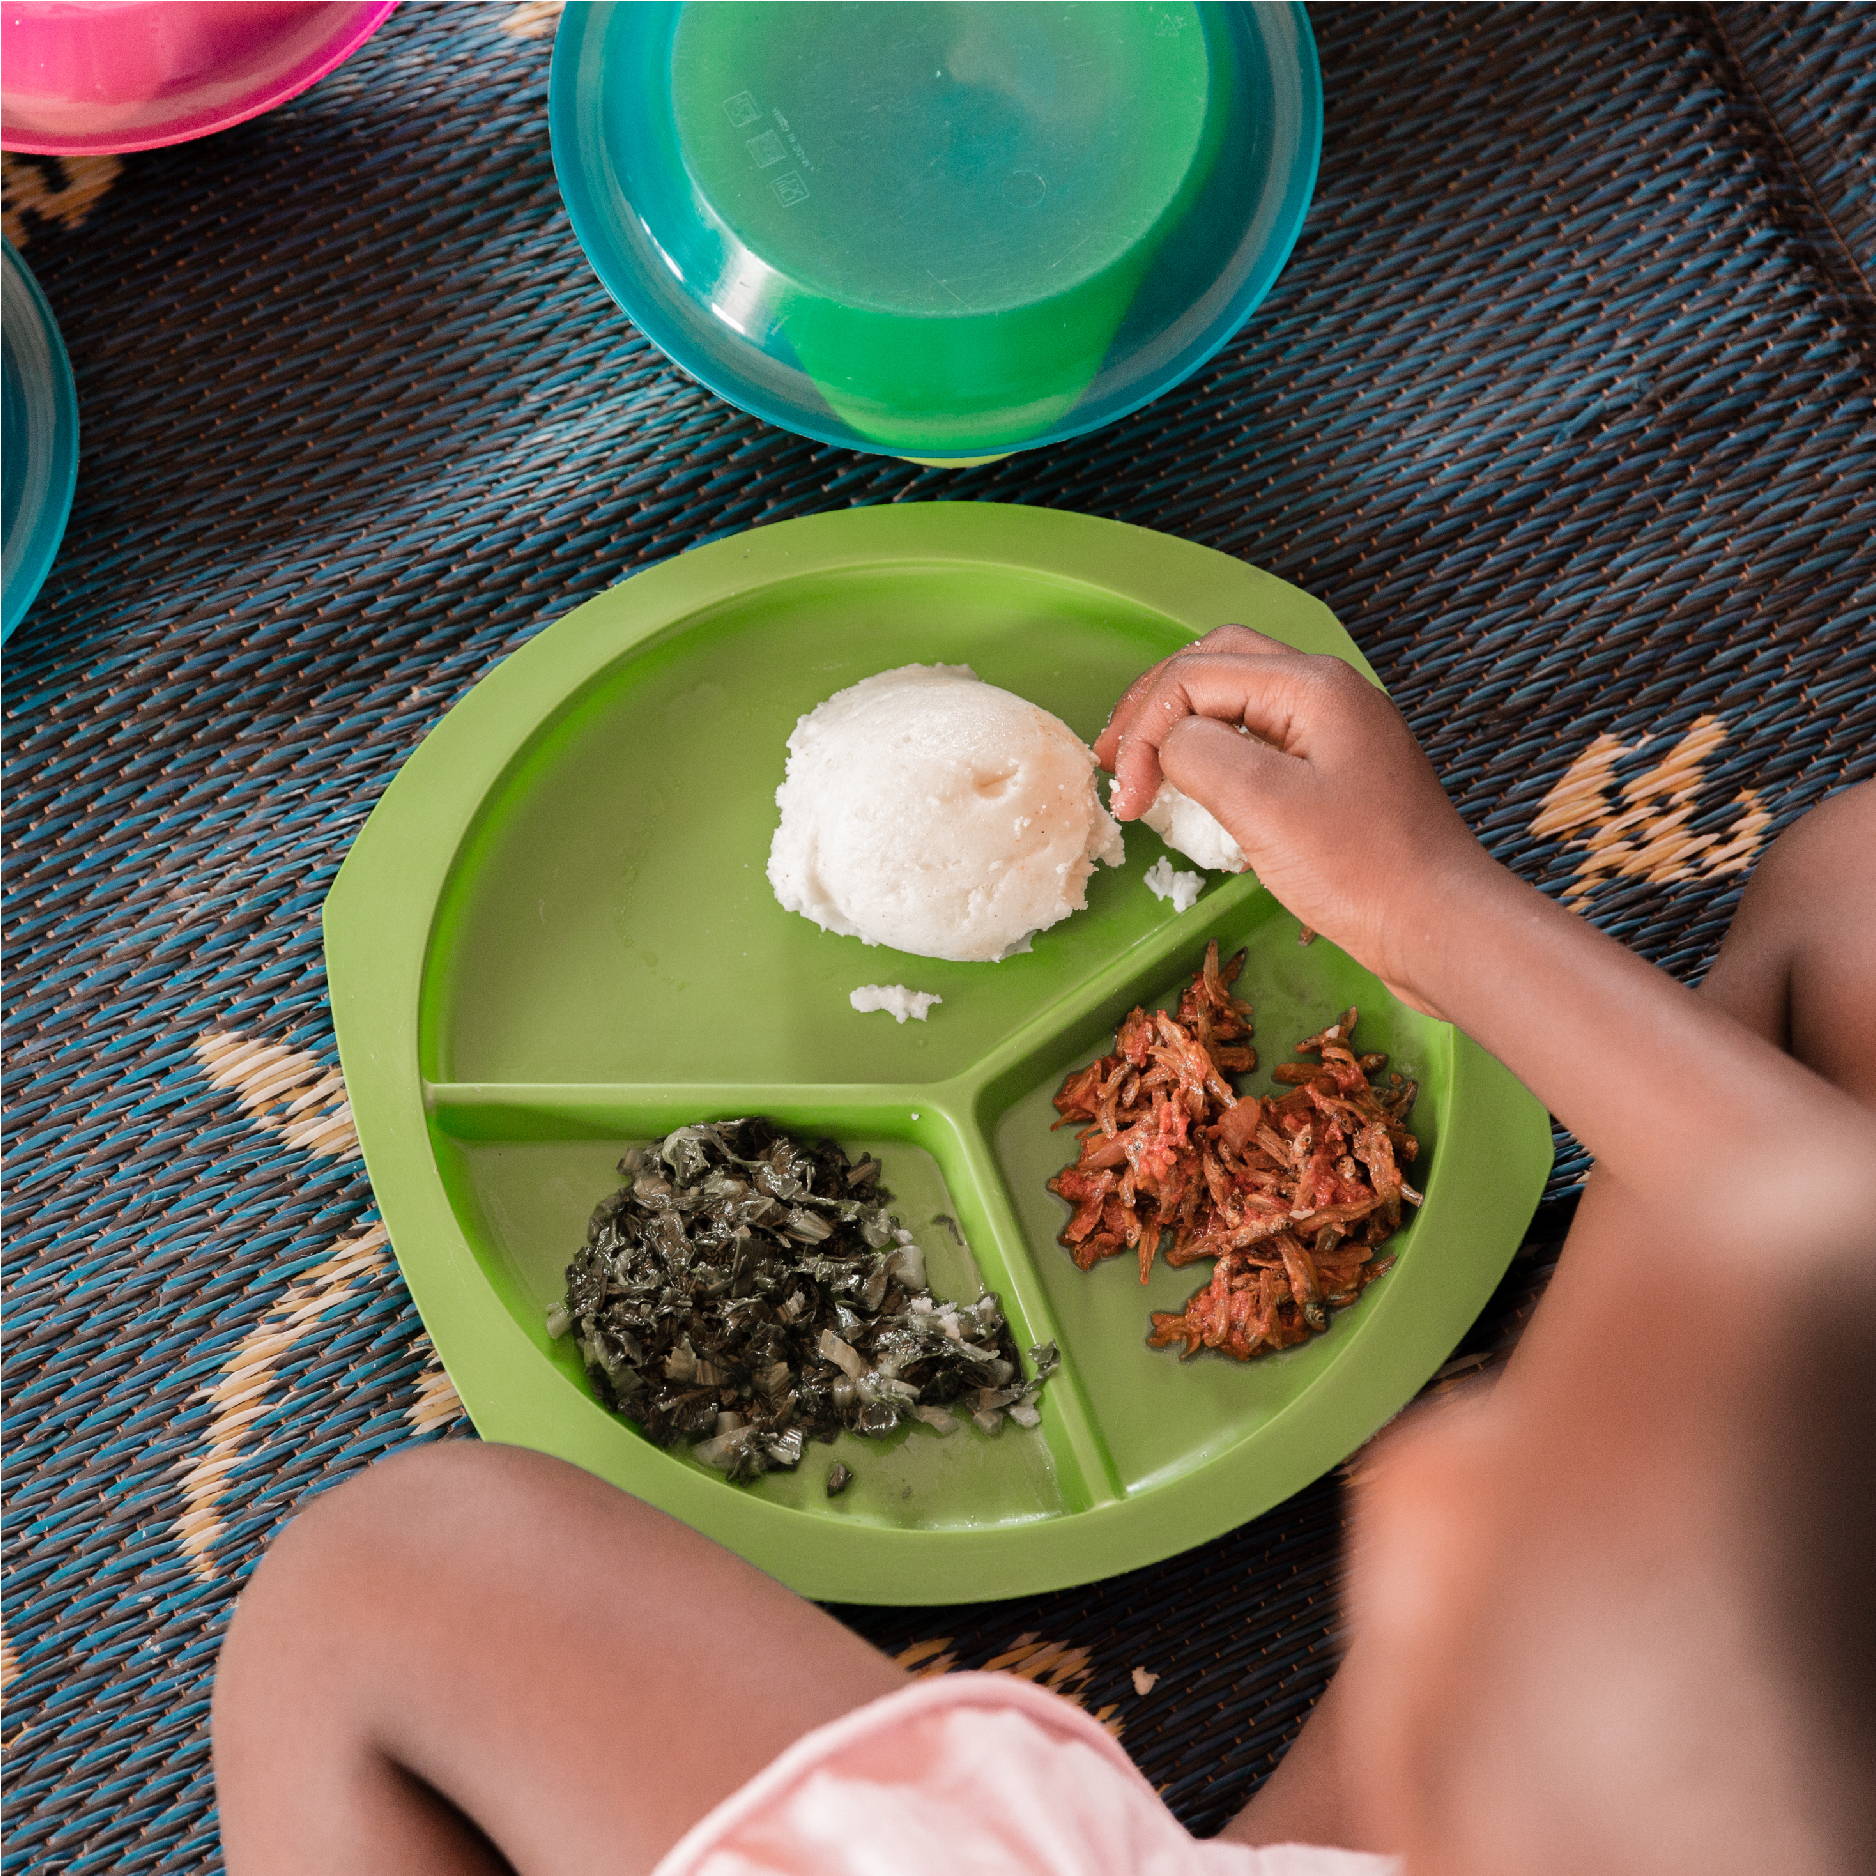 A girl is seen eating on a blue straw mat from a green plate. It is a traditional Zambian meal containing nshima 